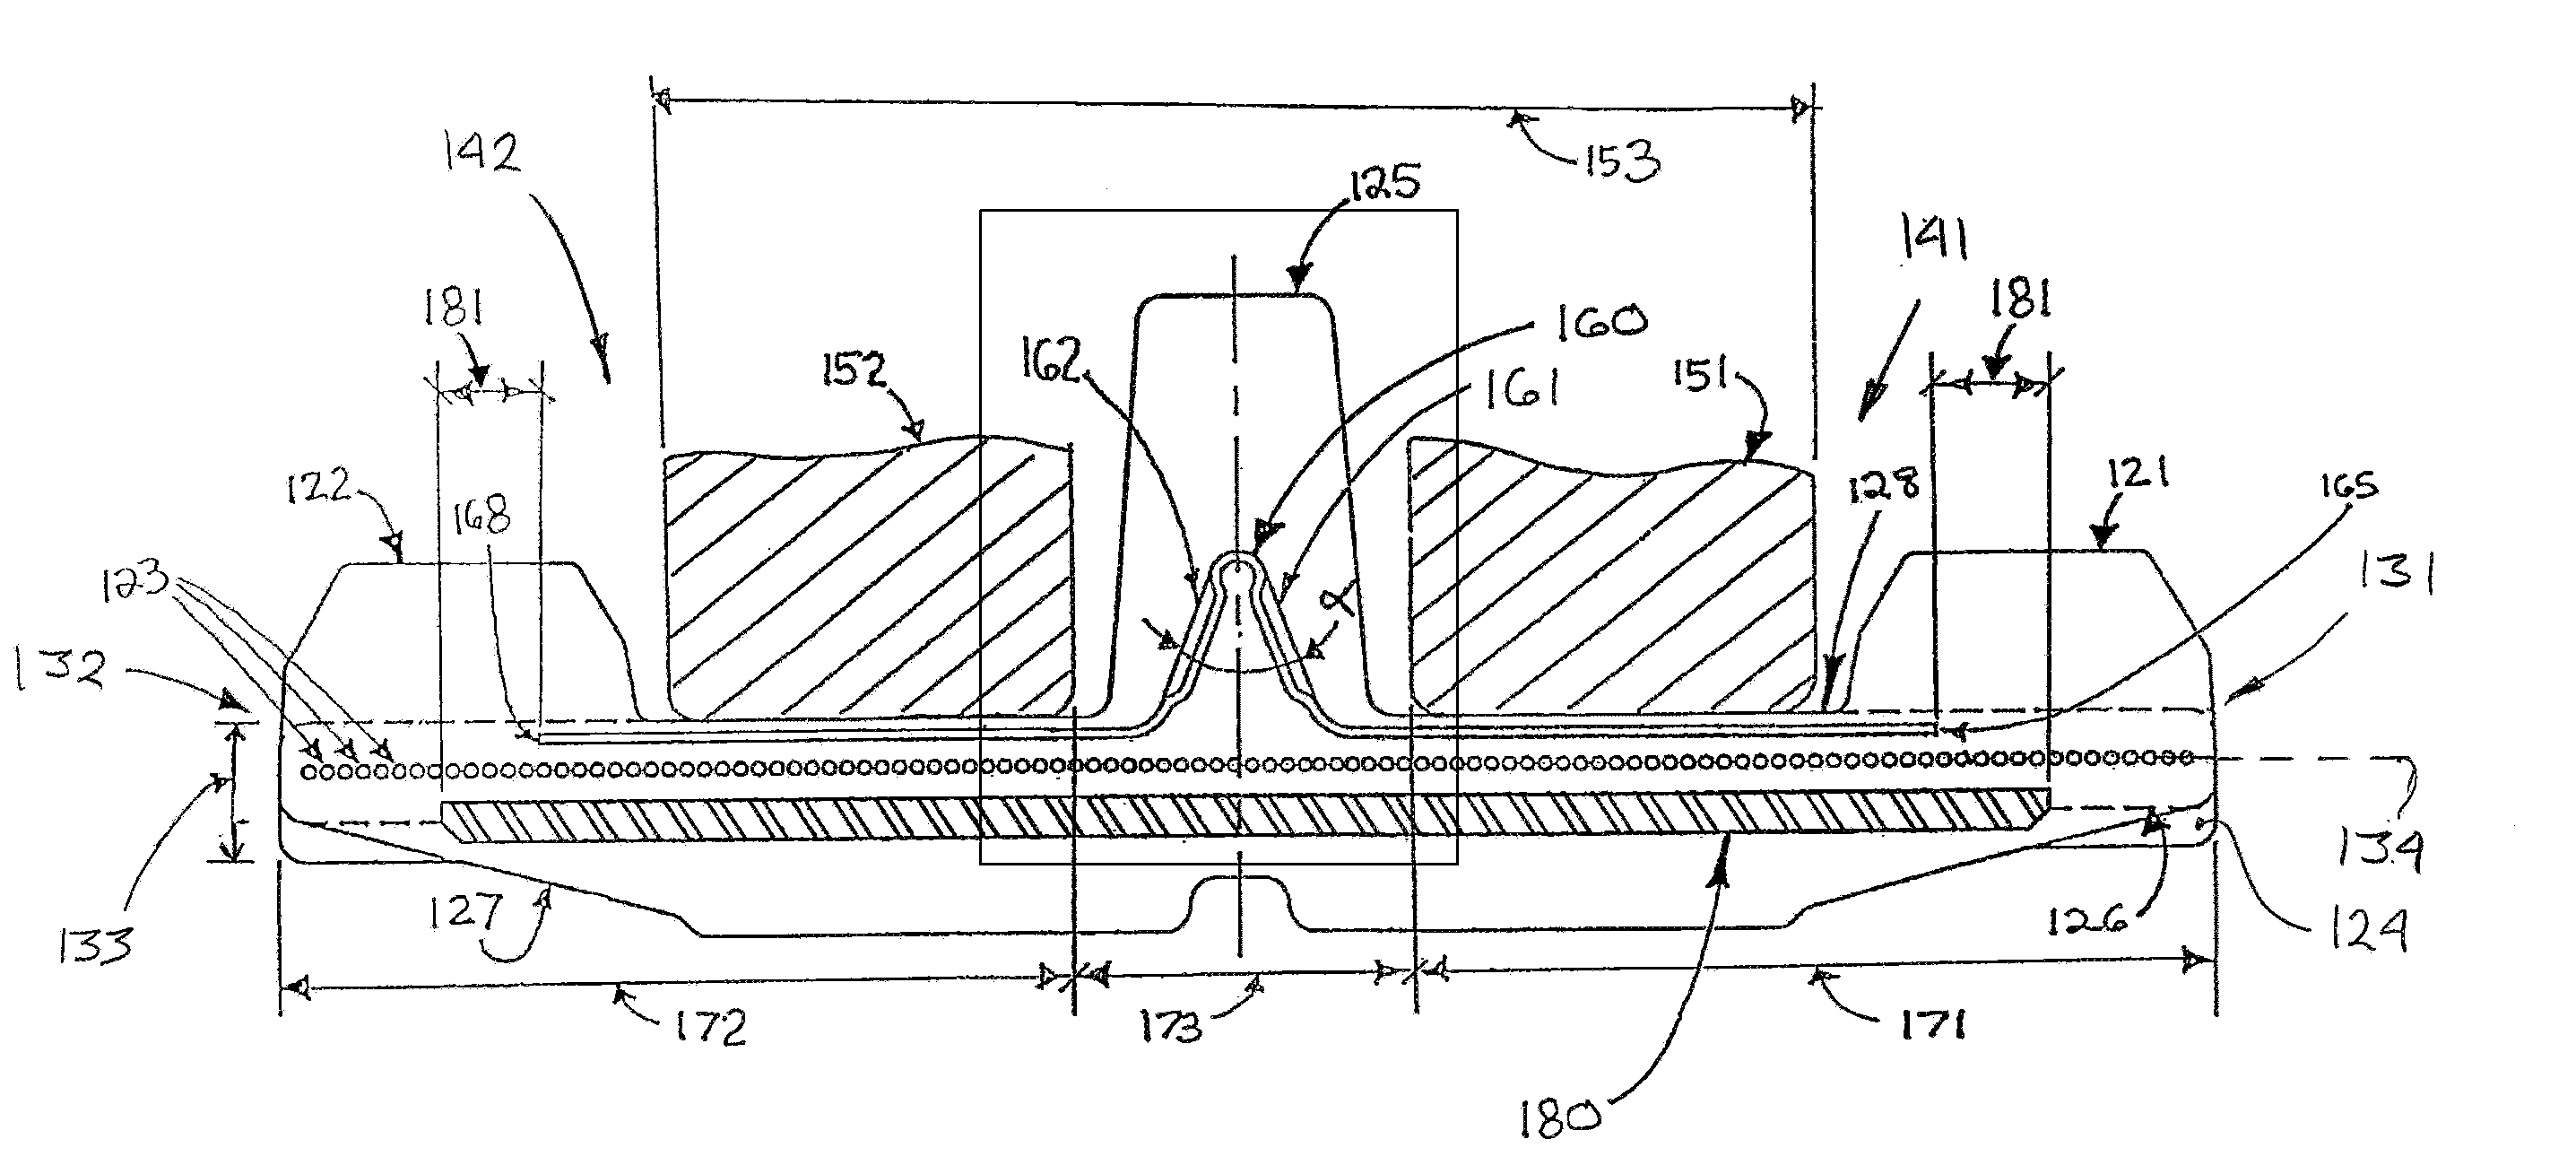 Elastomeric track with guide lug reinforcements